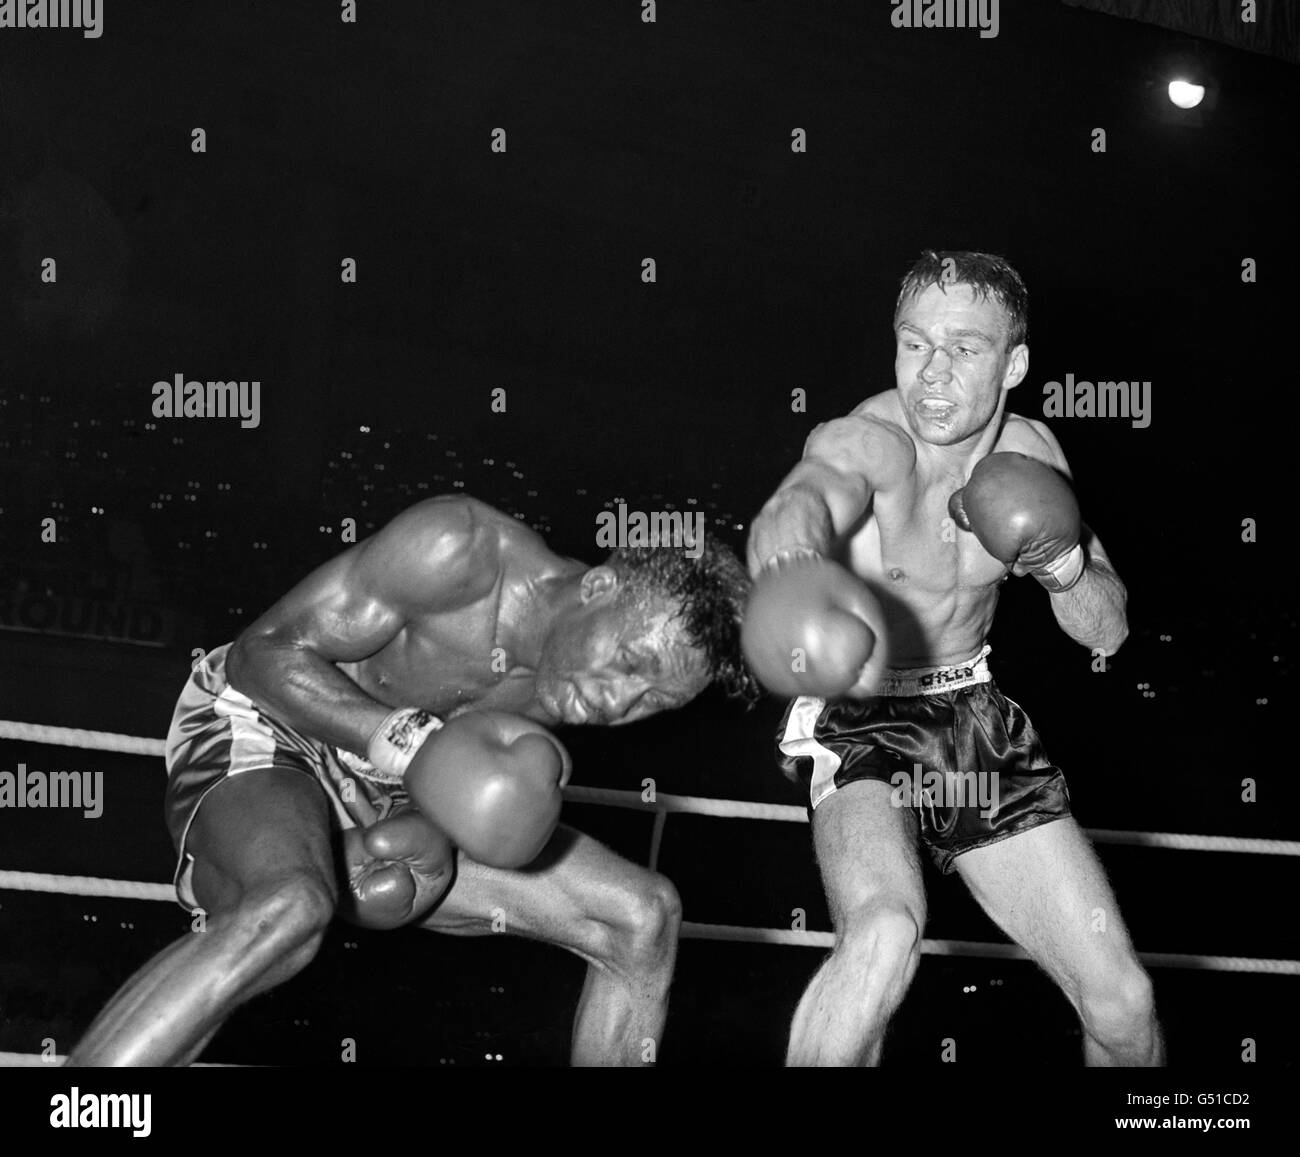 American Joe Brown (l) ducks down low as Britain's Dave Charnley goes on the attack. Joe Brown went on to win on points after 15 rounds. The fight was voted 1961 Ring Magazine Fight of the Year. Stock Photo